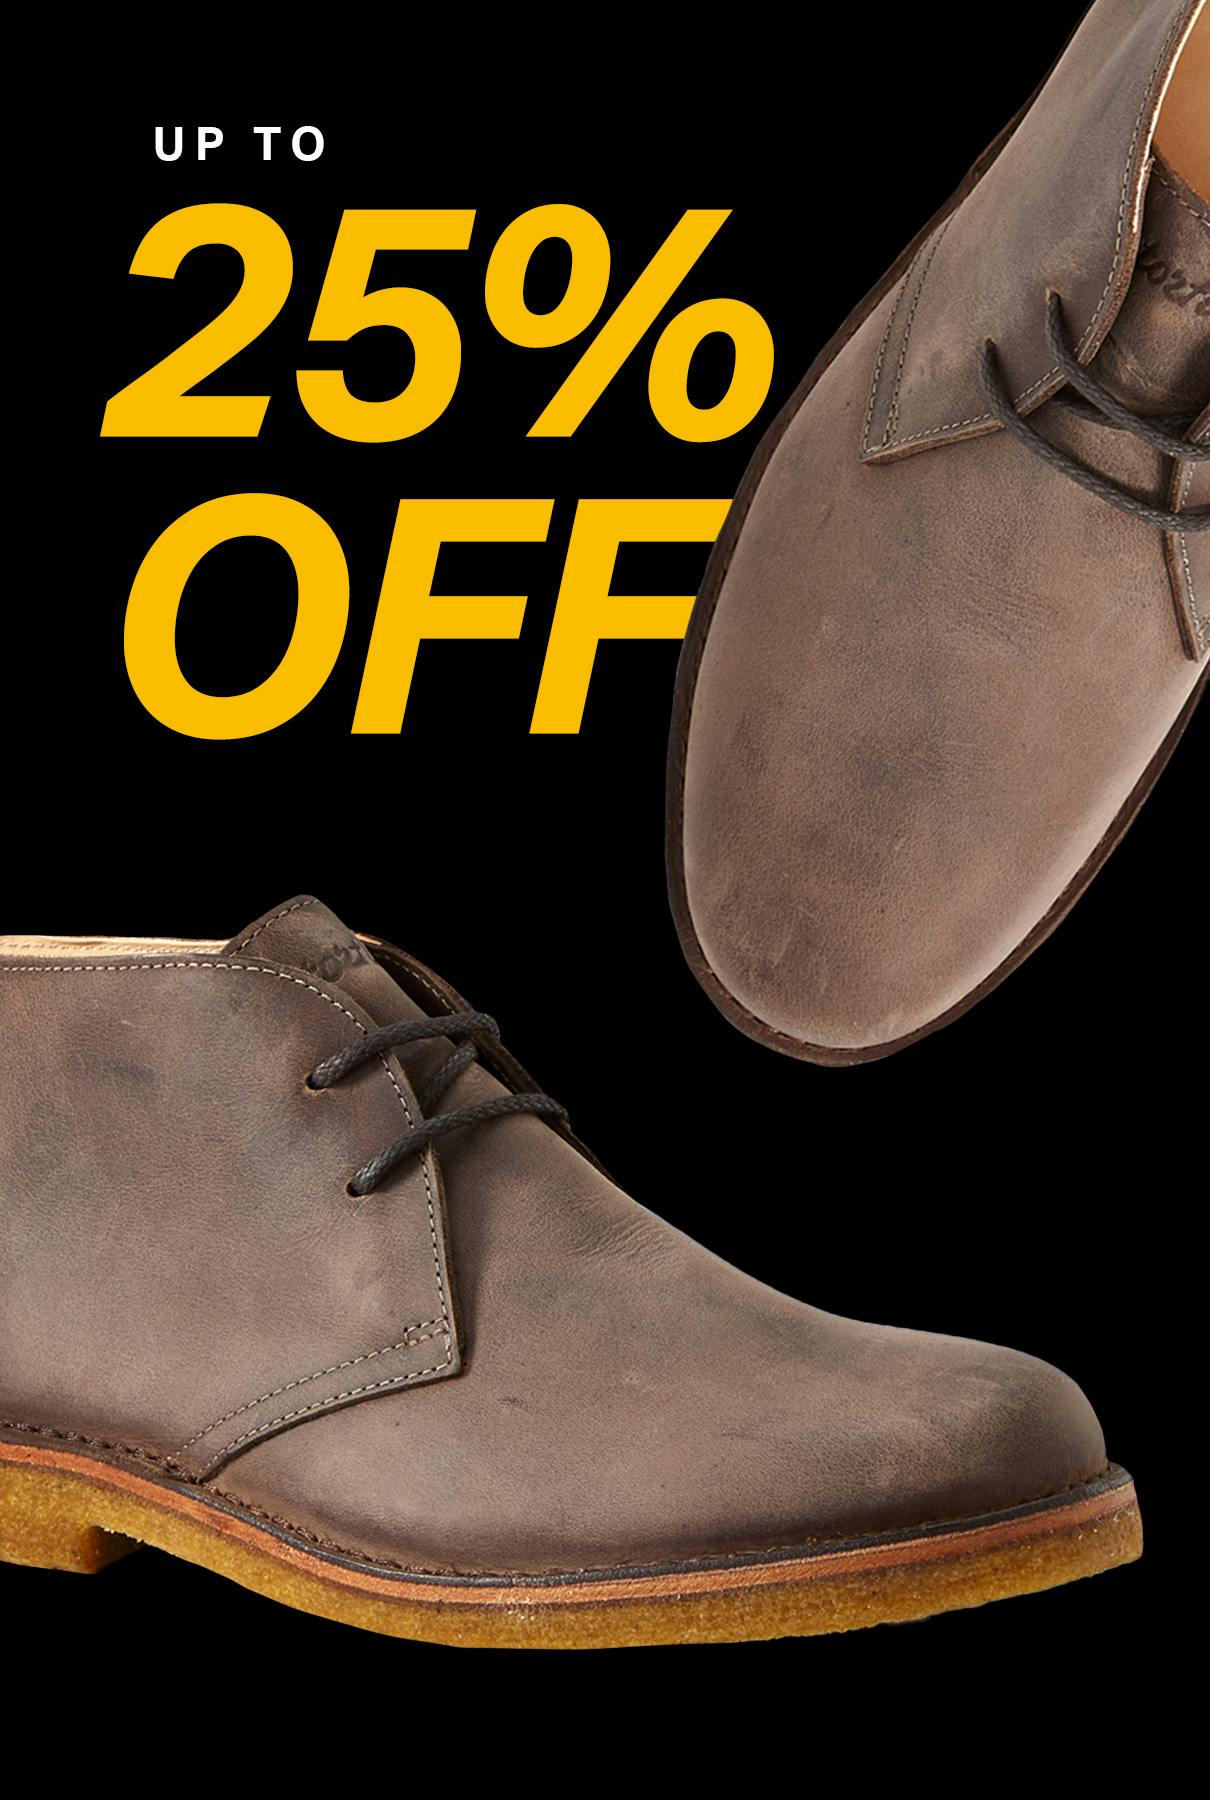 up to 25% OFF